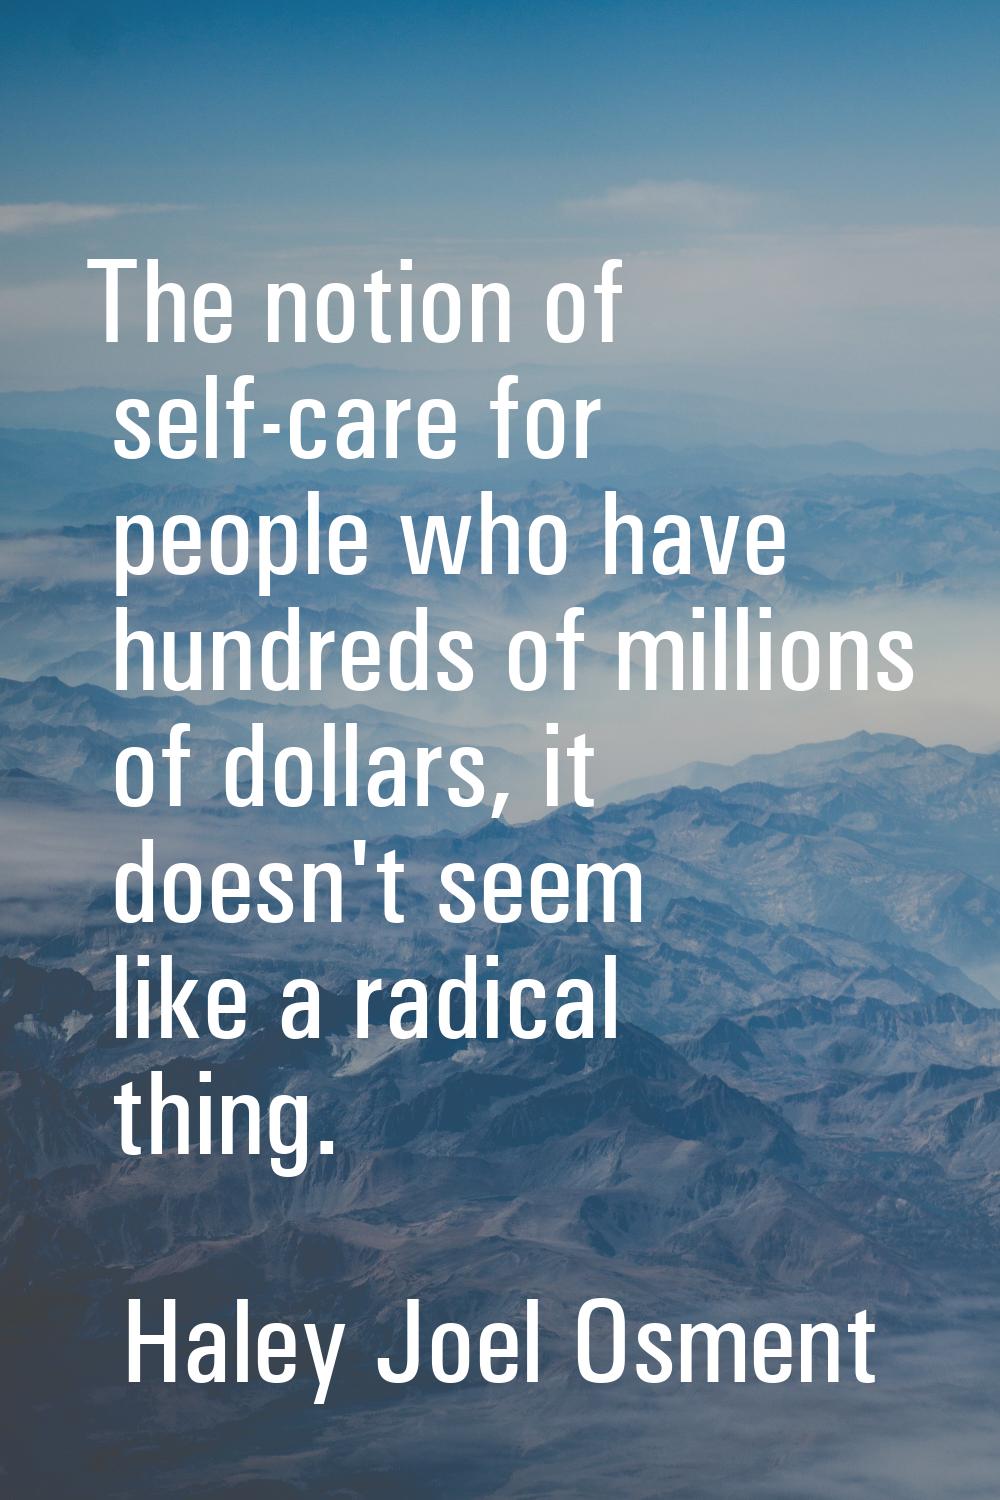 The notion of self-care for people who have hundreds of millions of dollars, it doesn't seem like a